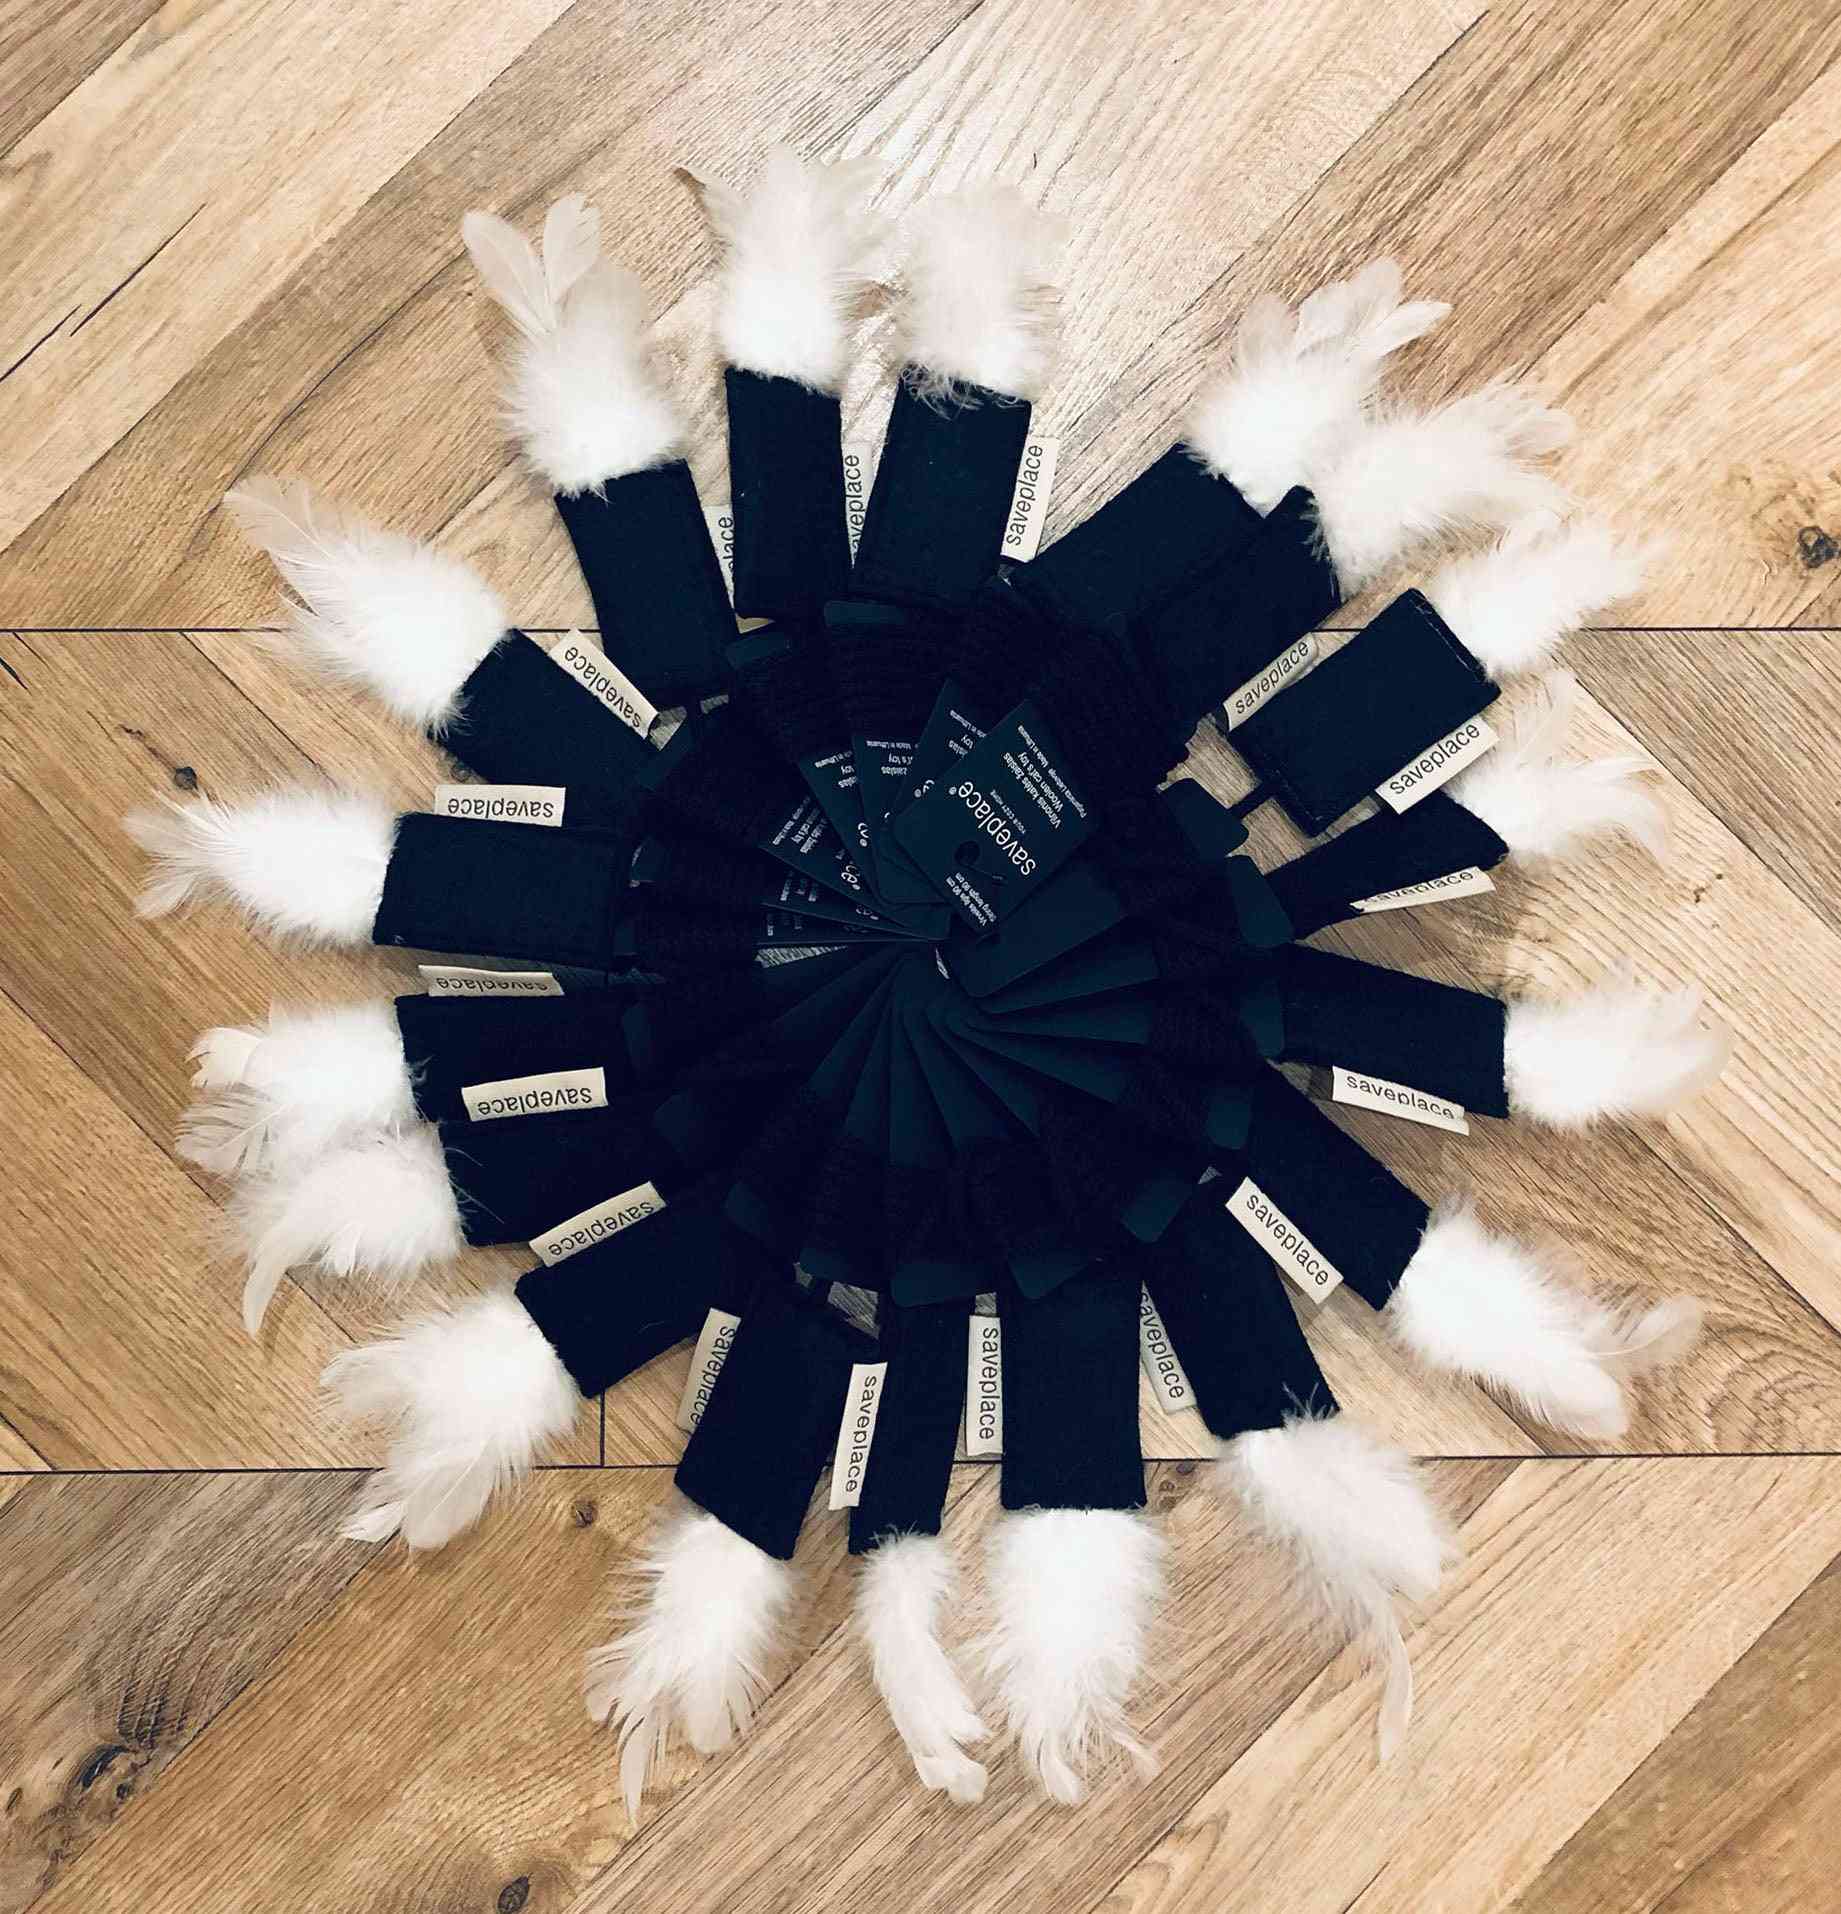 Woolen Black Cat Toy With White Feathers - Snow